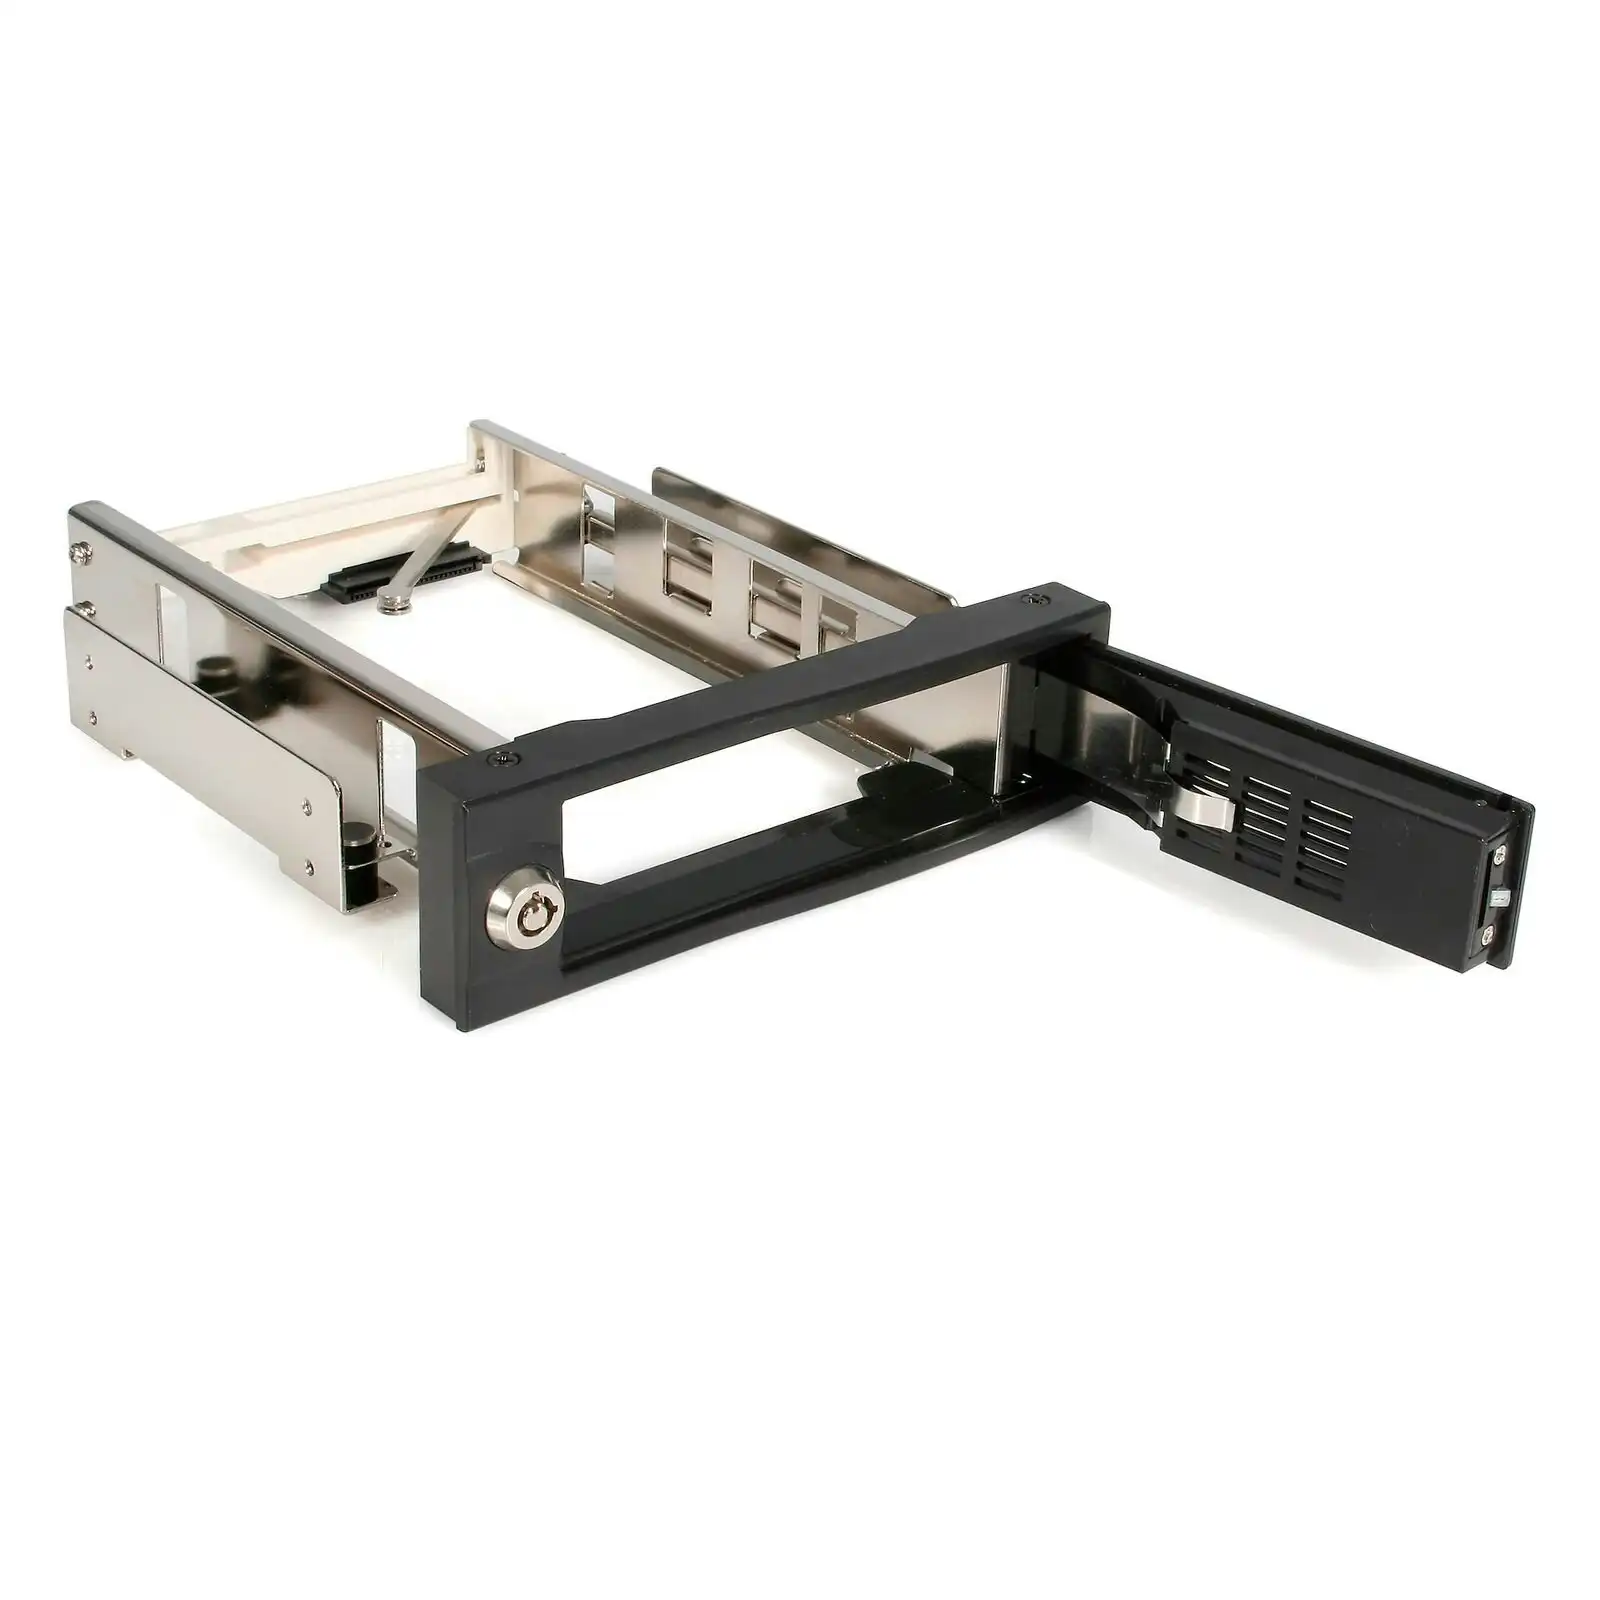 Star Tech 5.25in Trayless Hot Swap Mobile Rack Storage for 3.5" SATA Hard Drive